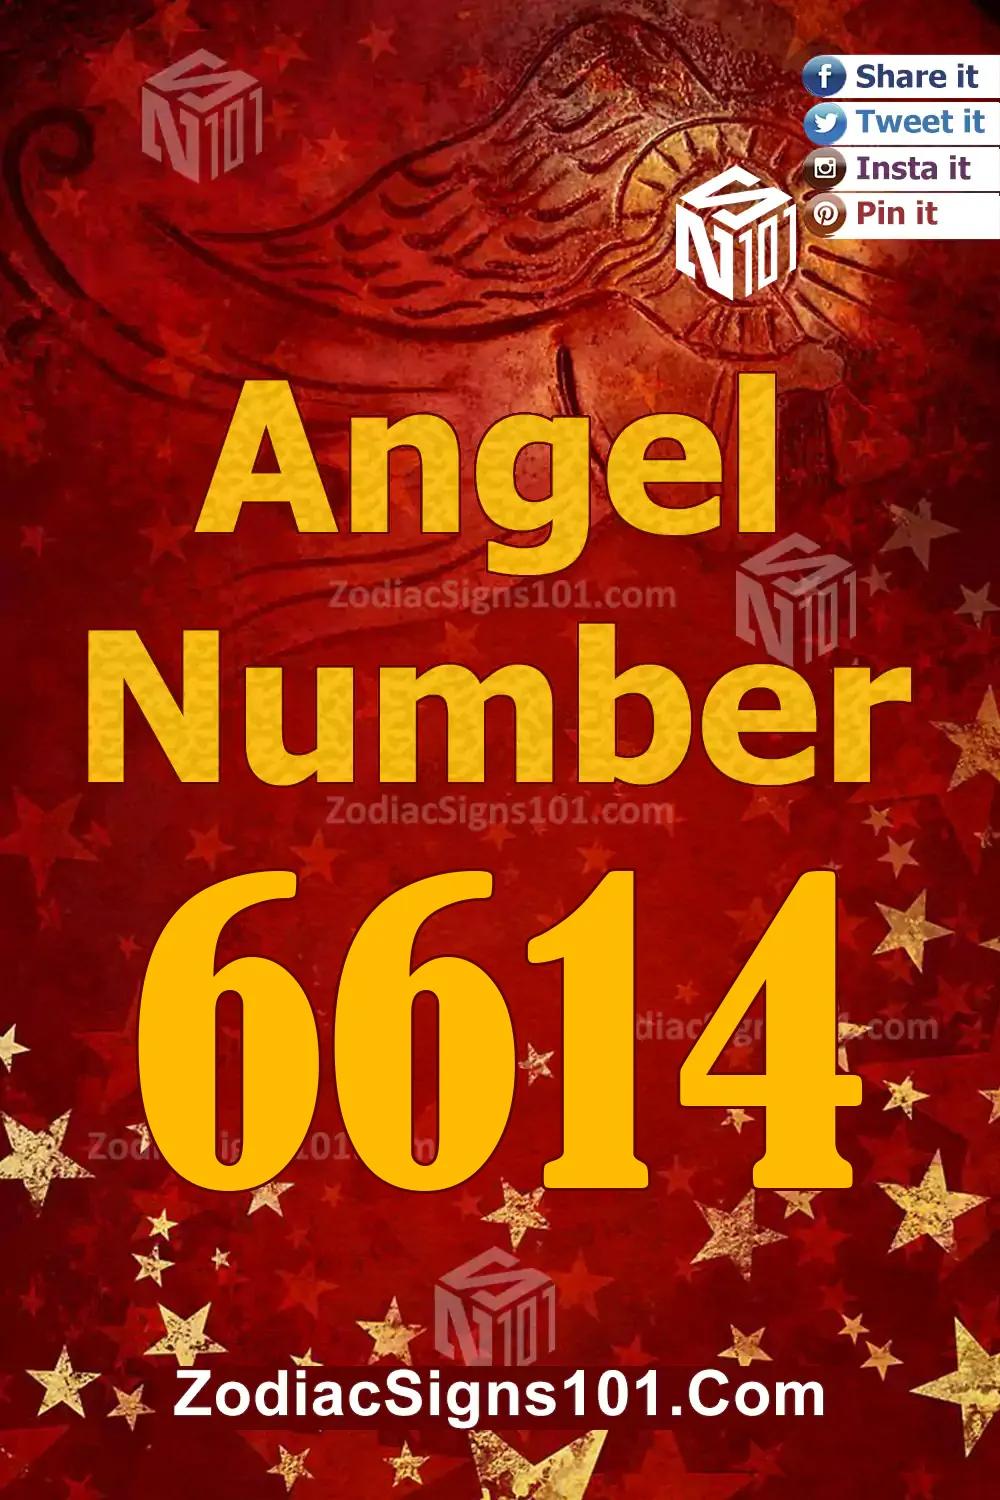 6614 Angel Number Meaning